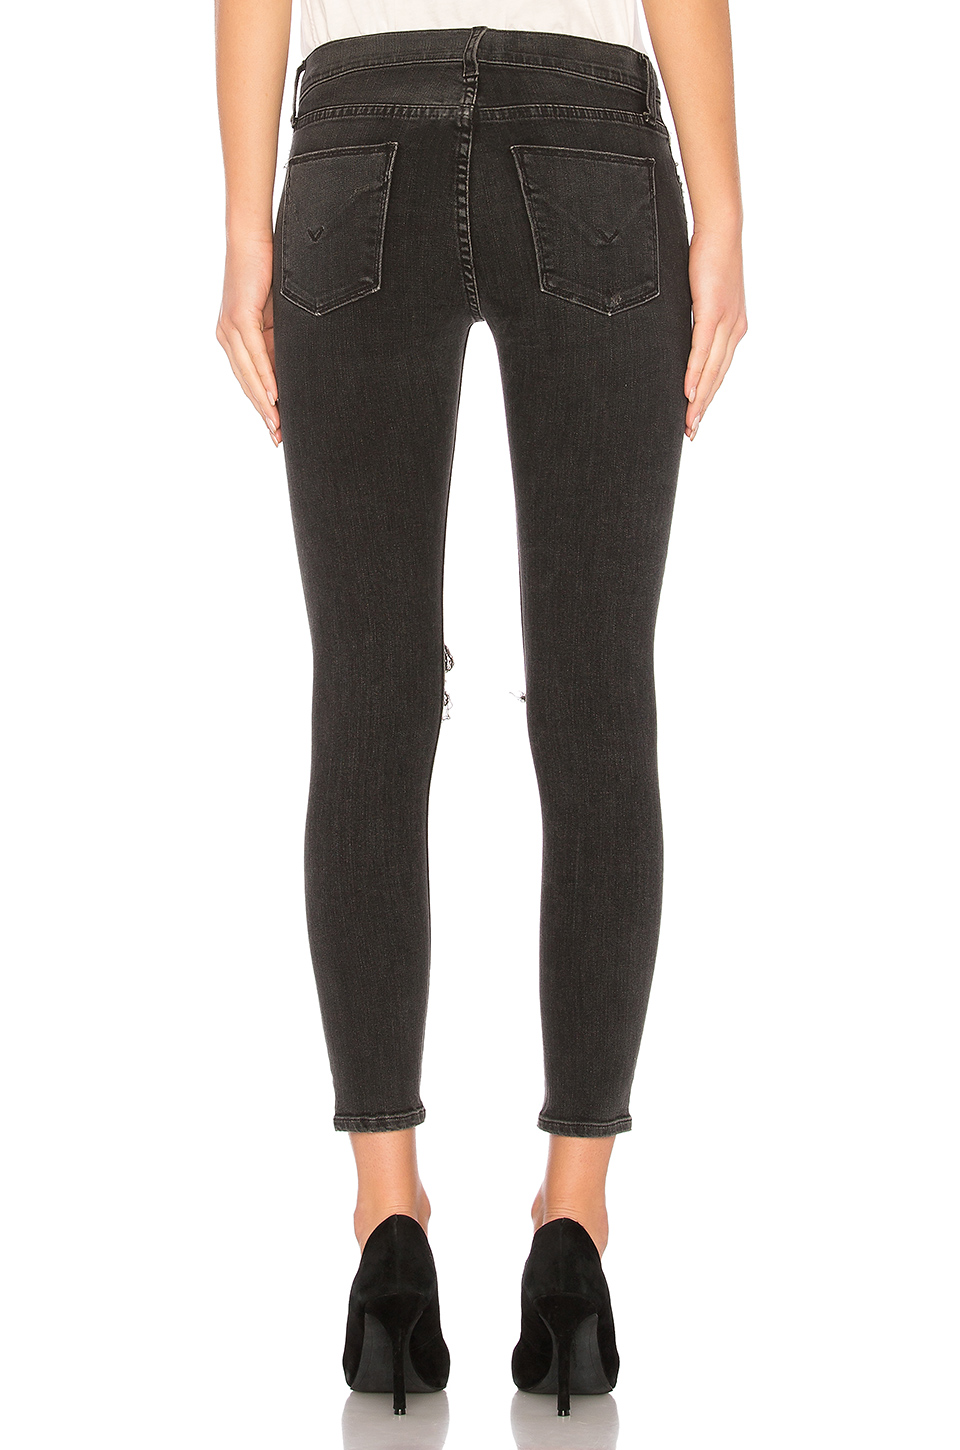 Find Of The Week: Hudson Nico Ankle Skinny in Time Bomb – THE JEANS BLOG